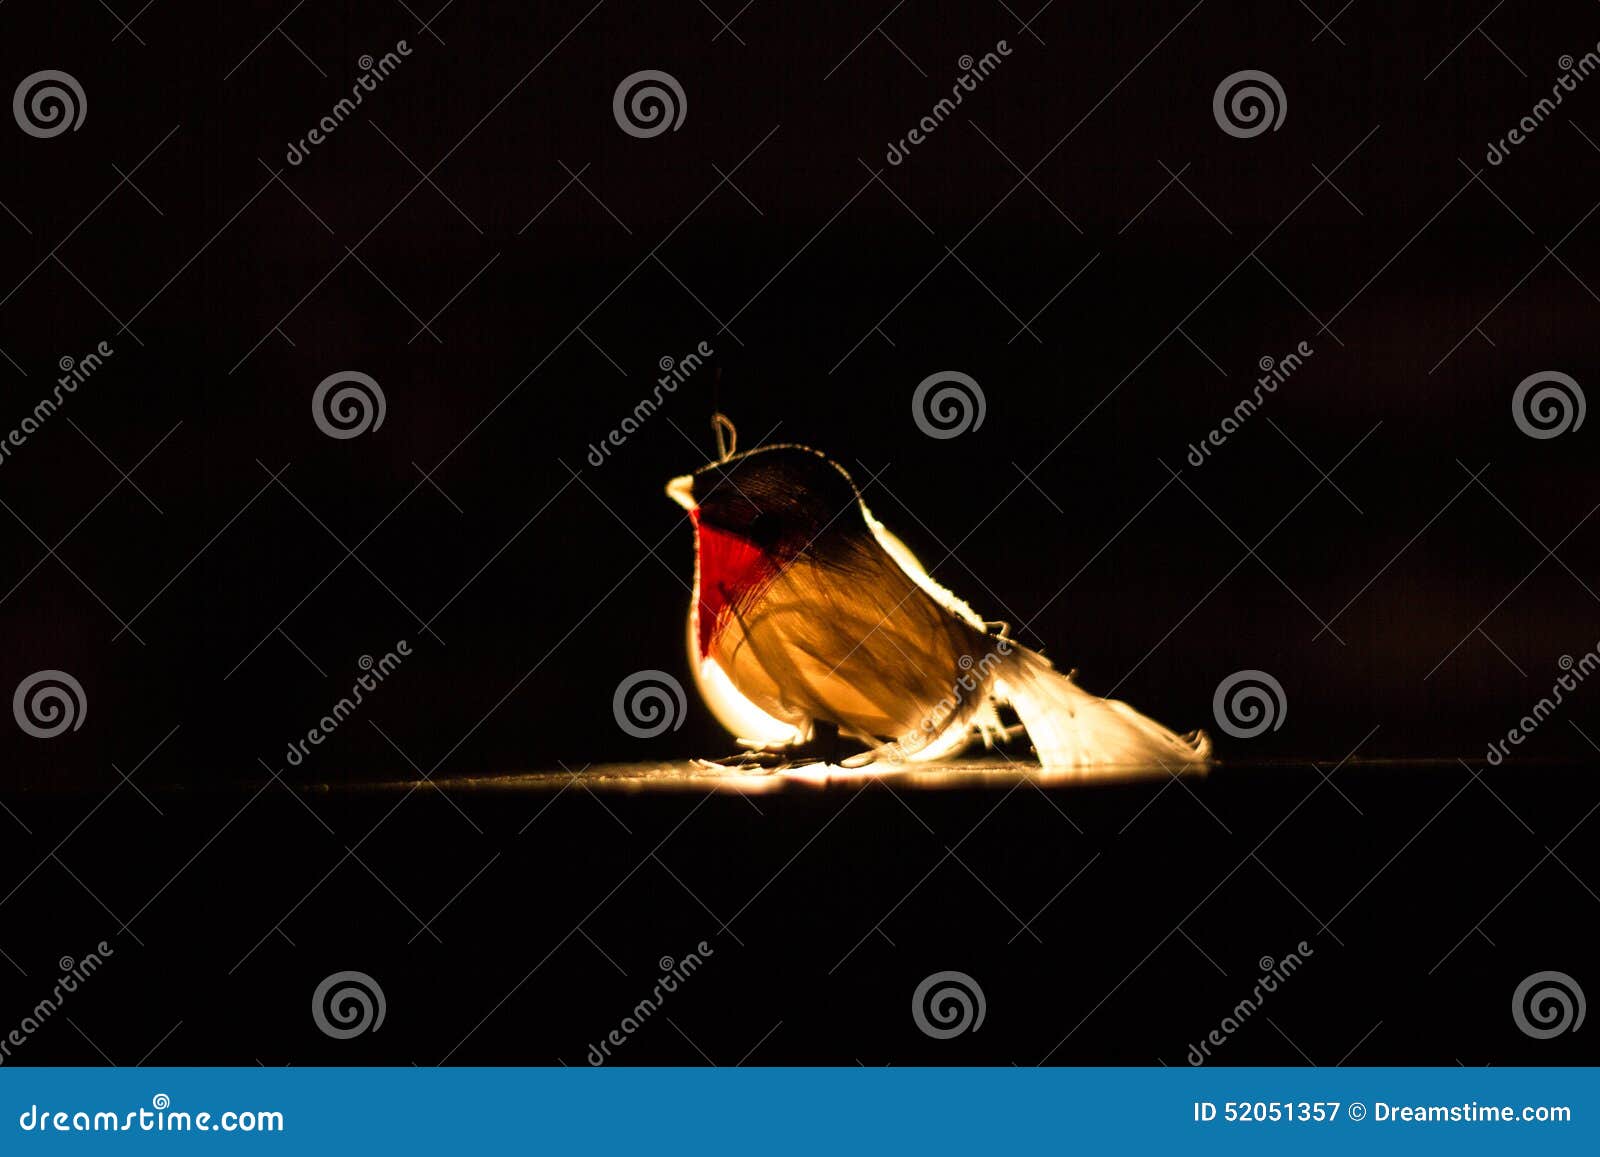 Learn to Fly stock image. Image of darkness, enlight - 52051357